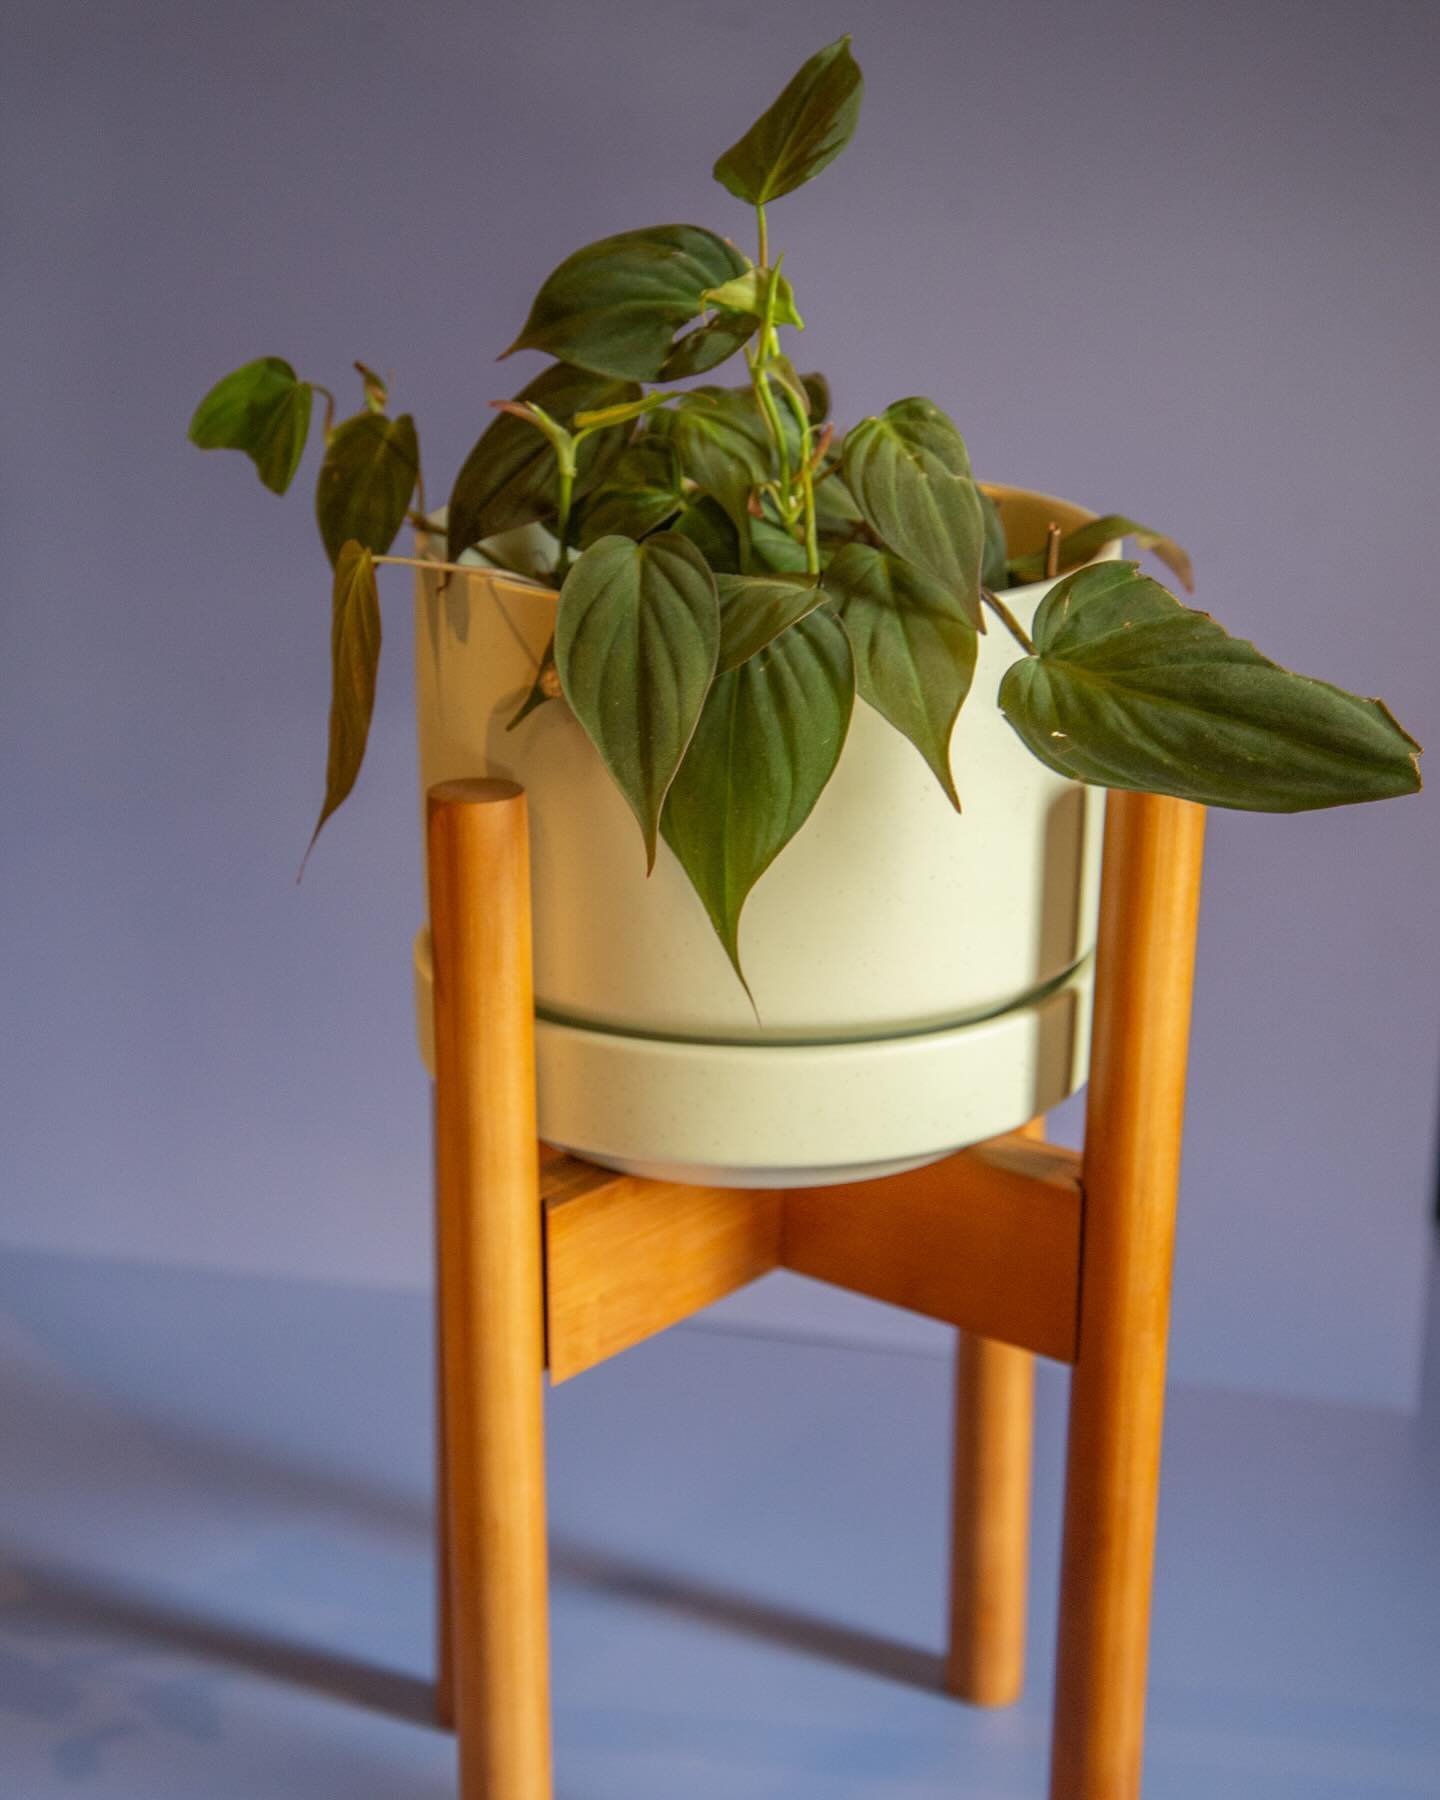 Take your plants to new heights - pop em on a stand! 

These @kansodesigns bamboo planter stands are adjustable, holding up to 12&rdquo; pots, and can be flipped upside down for even more customization!